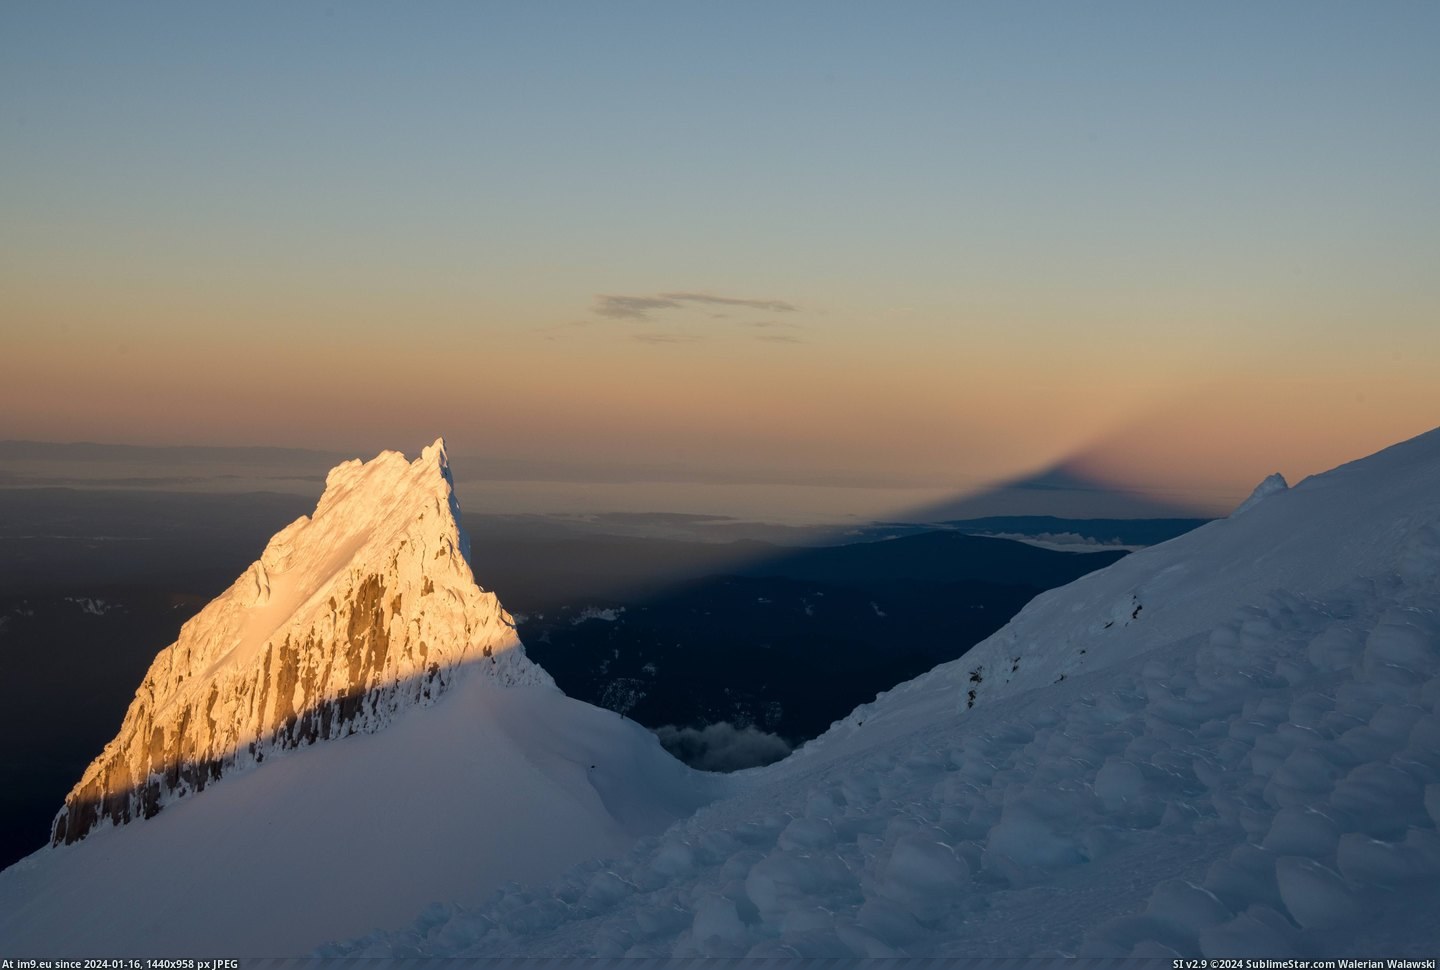 #Photo #Rock #Light #George #Jason #Shadow #Hood #Hits [Earthporn] The shadow of Mt. Hood extending out while light hits Illumination Rock  [5857x3910] Photo by: Jason George Pic. (Изображение из альбом My r/EARTHPORN favs))